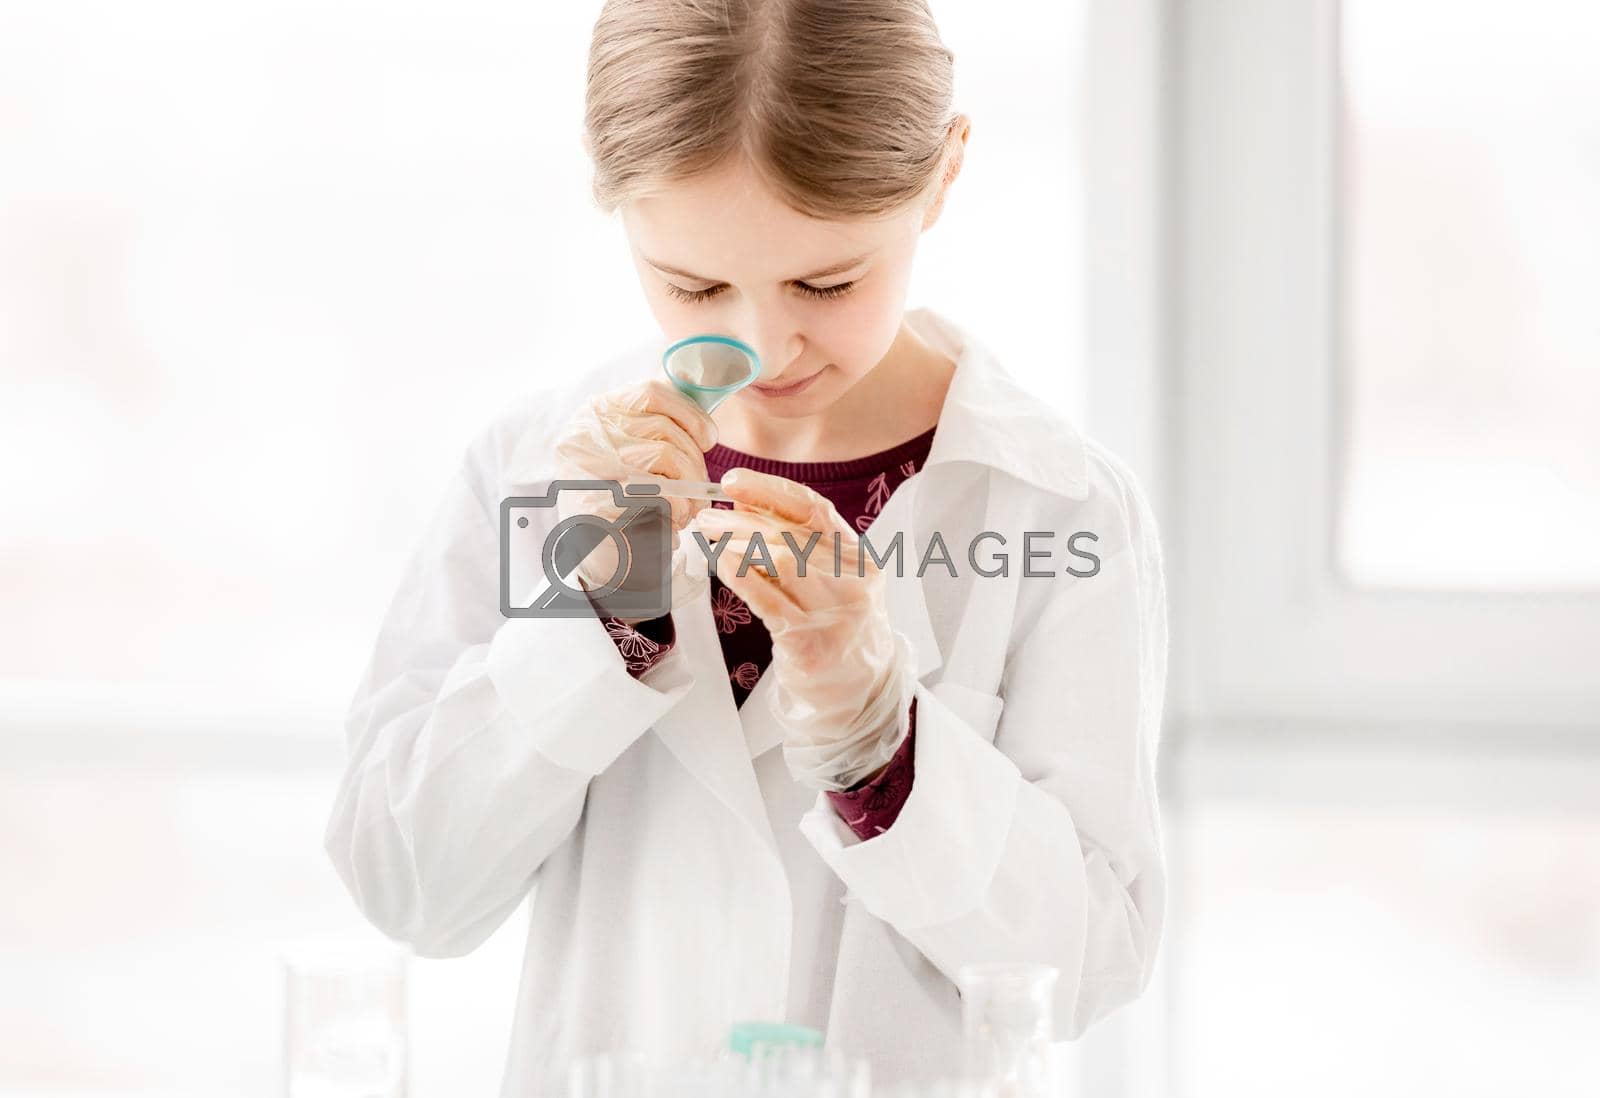 Royalty free image of Girl on chemistry lesson by tan4ikk1